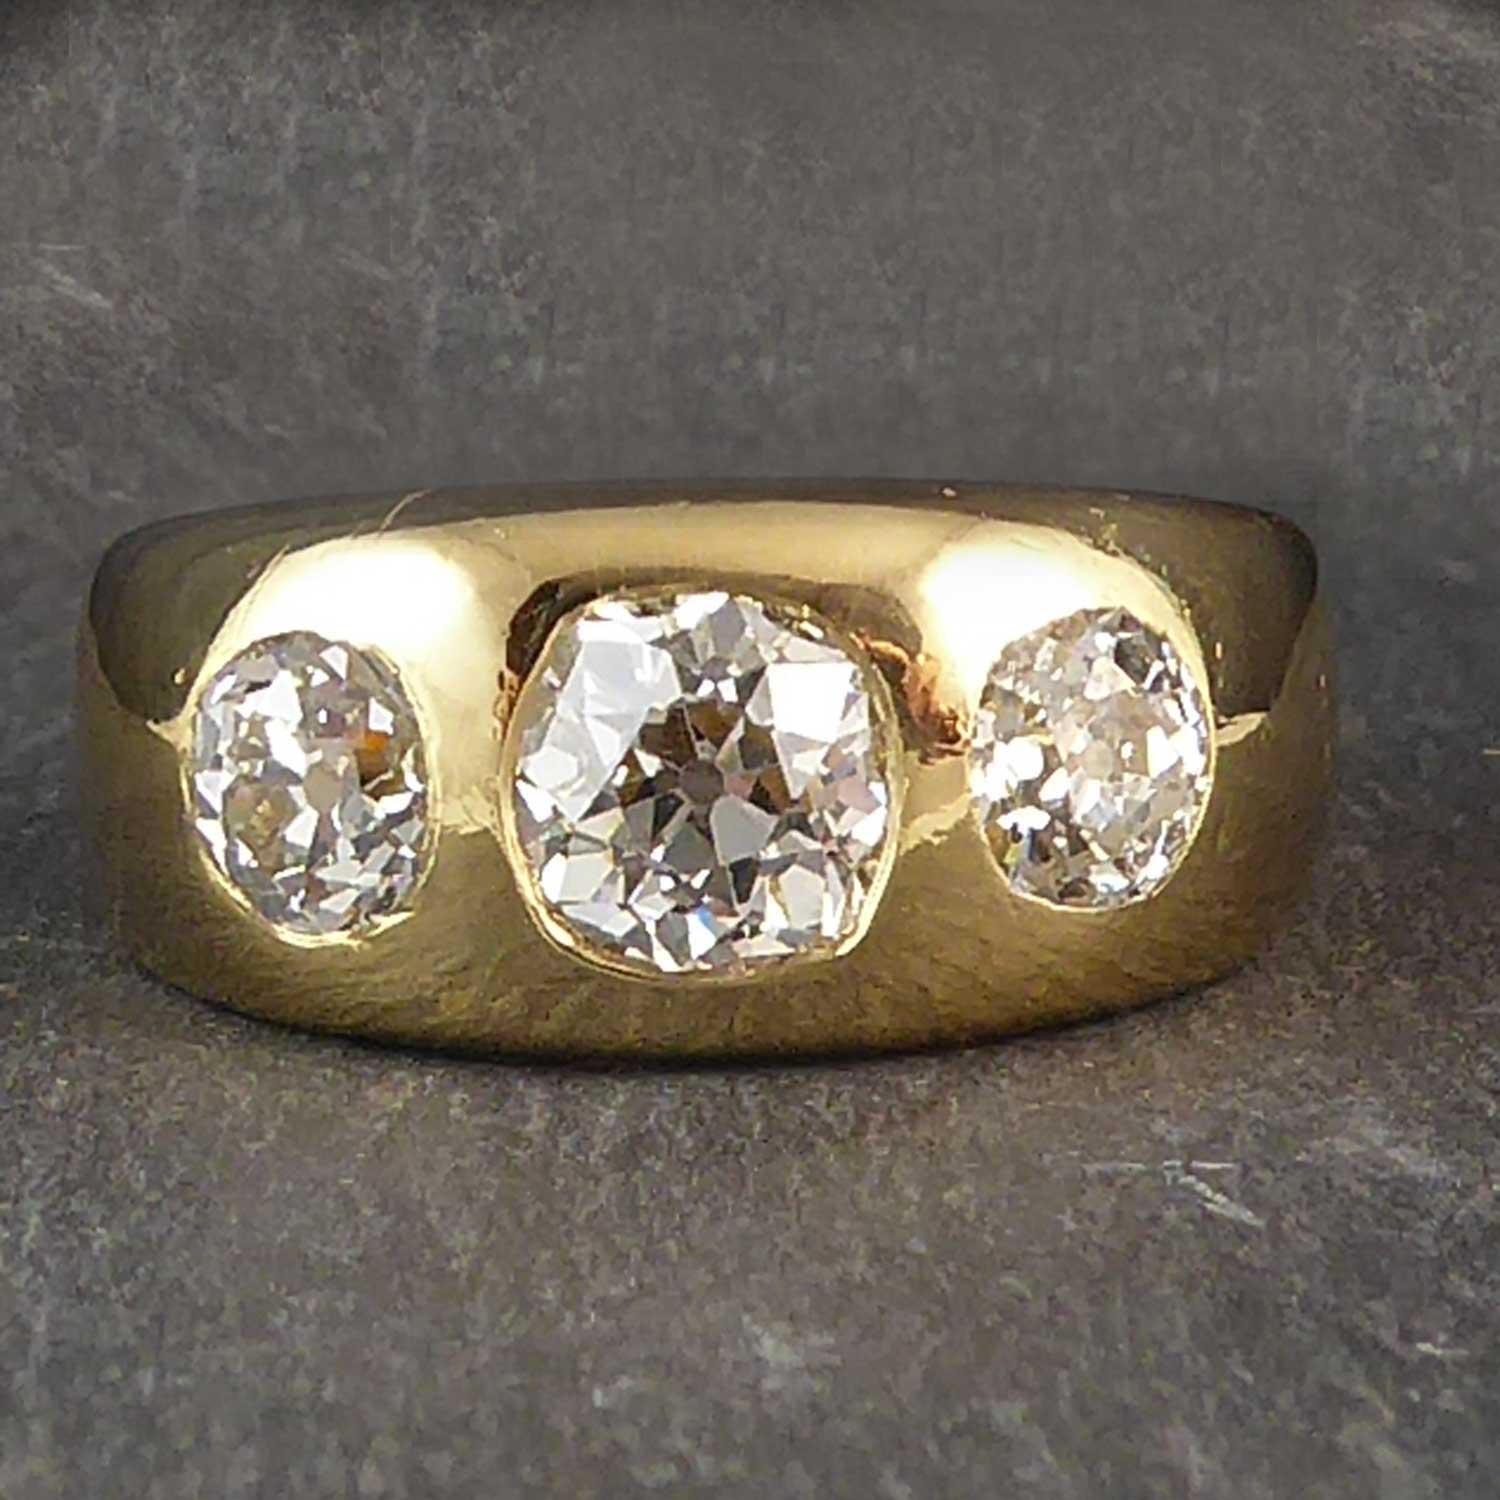 A Victorian diamond three stone ring in a substantial 18ct yellow gold wide band that look fabulous worn as 